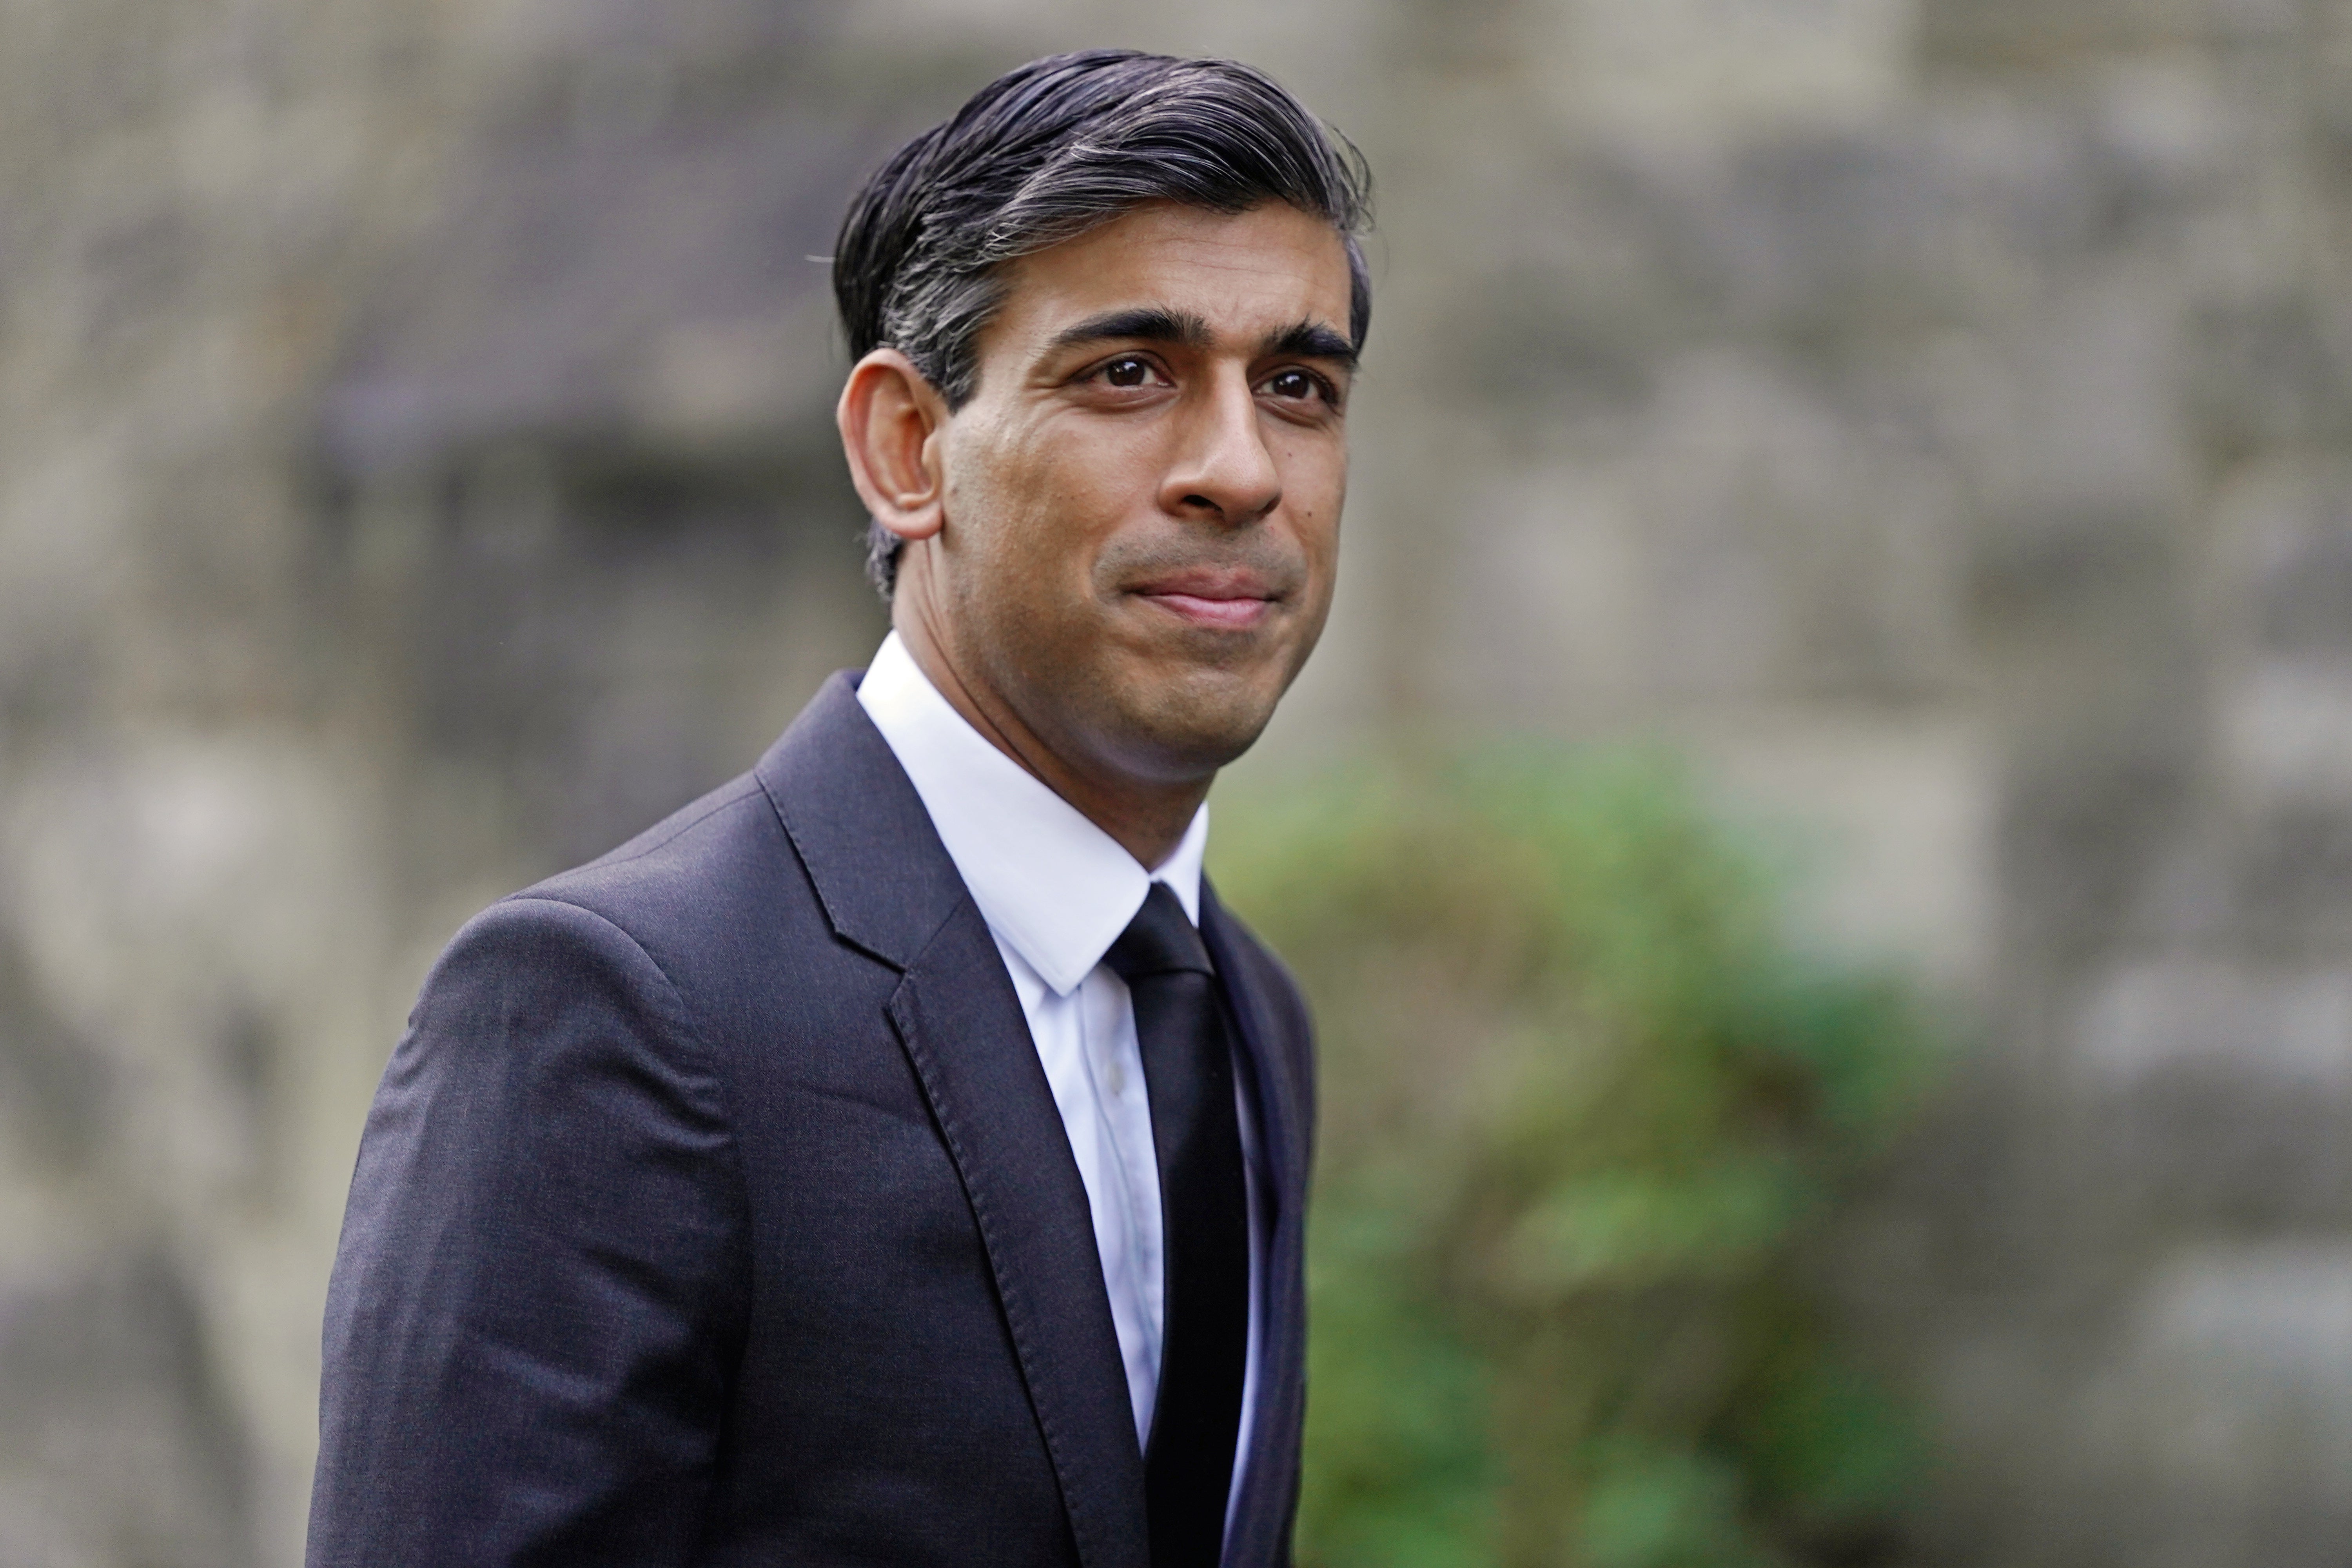 The chancellor, Rishi Sunak, has some decisions to make